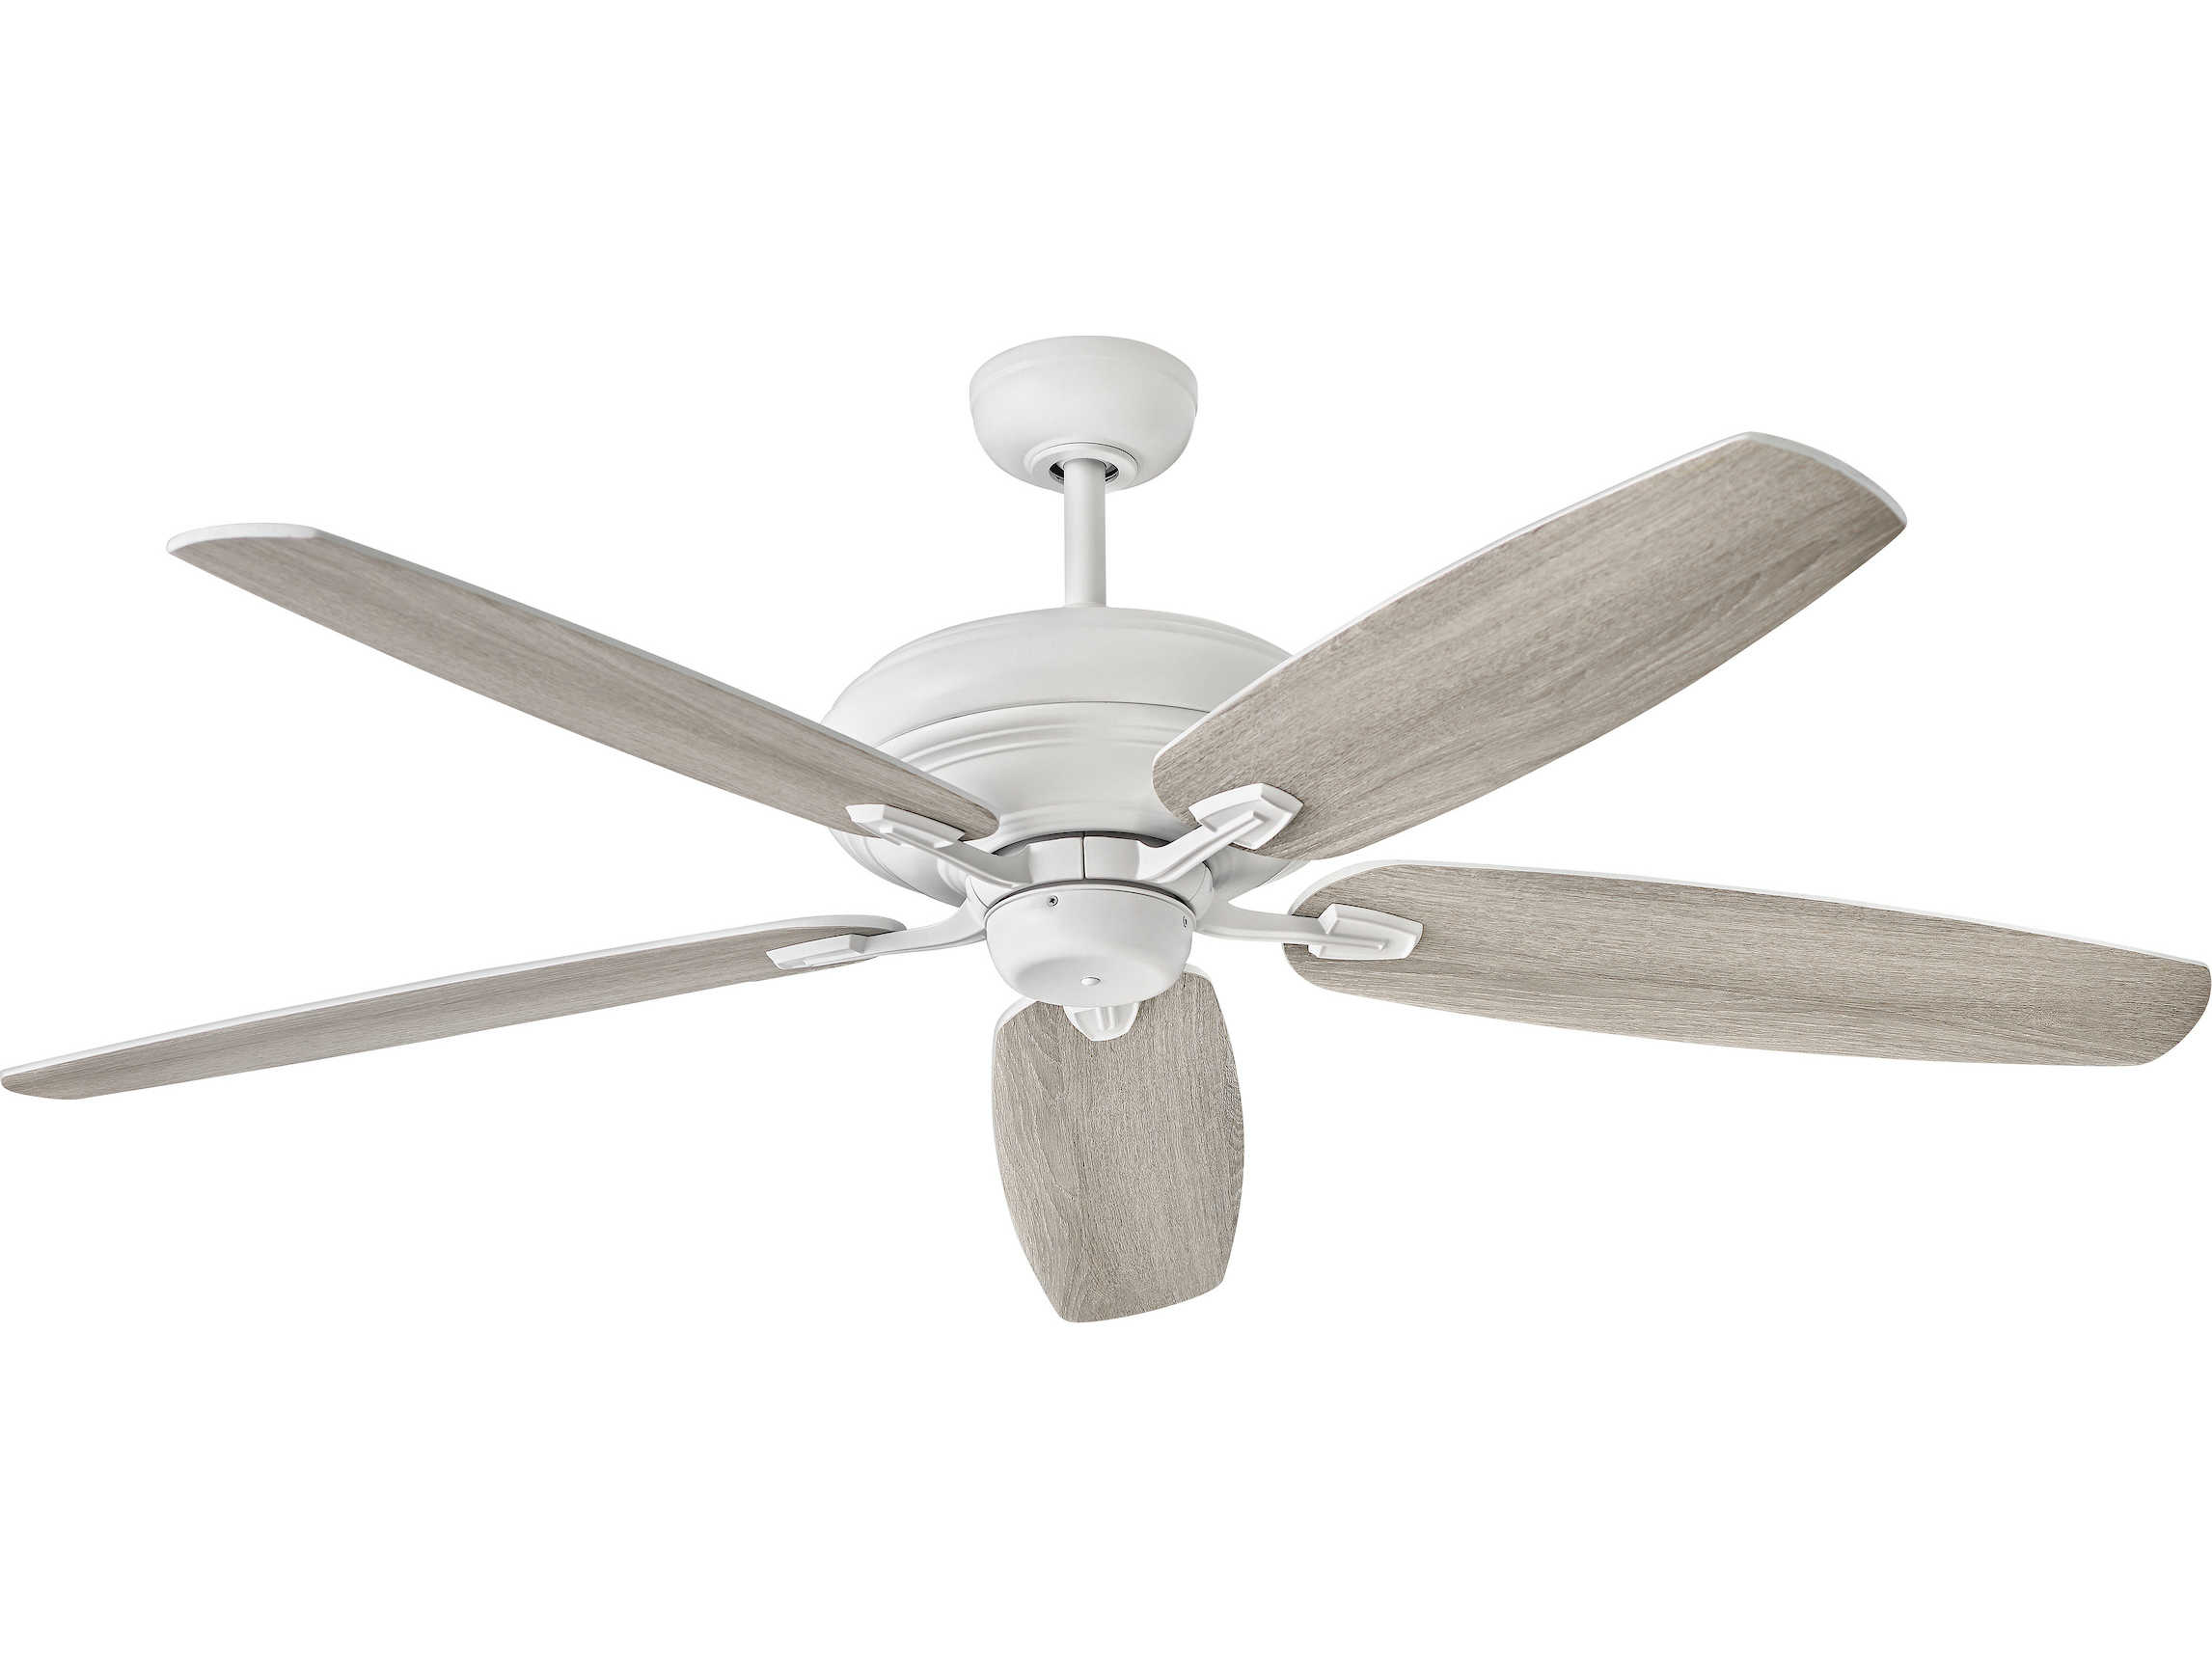 Hinkley Lighting Grander Chalk White 60 Wide Indoor Ceiling Fan With Reversible Weathered Wood Chalk White Blades Hy900660fcwnid